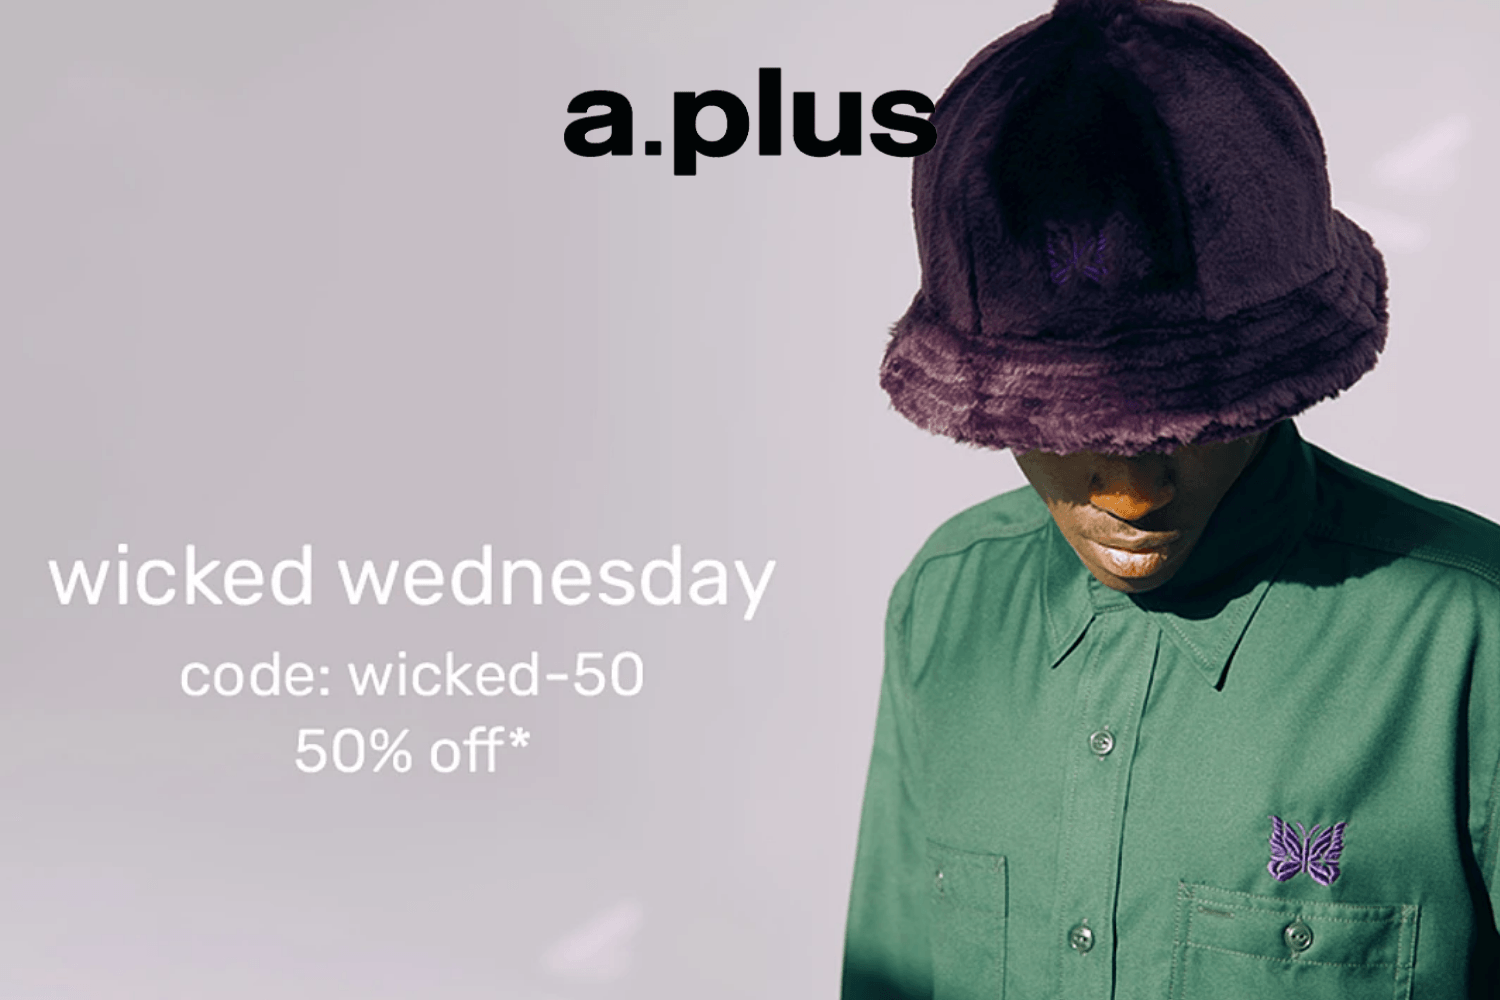 a.plus offers 50% discount on many items